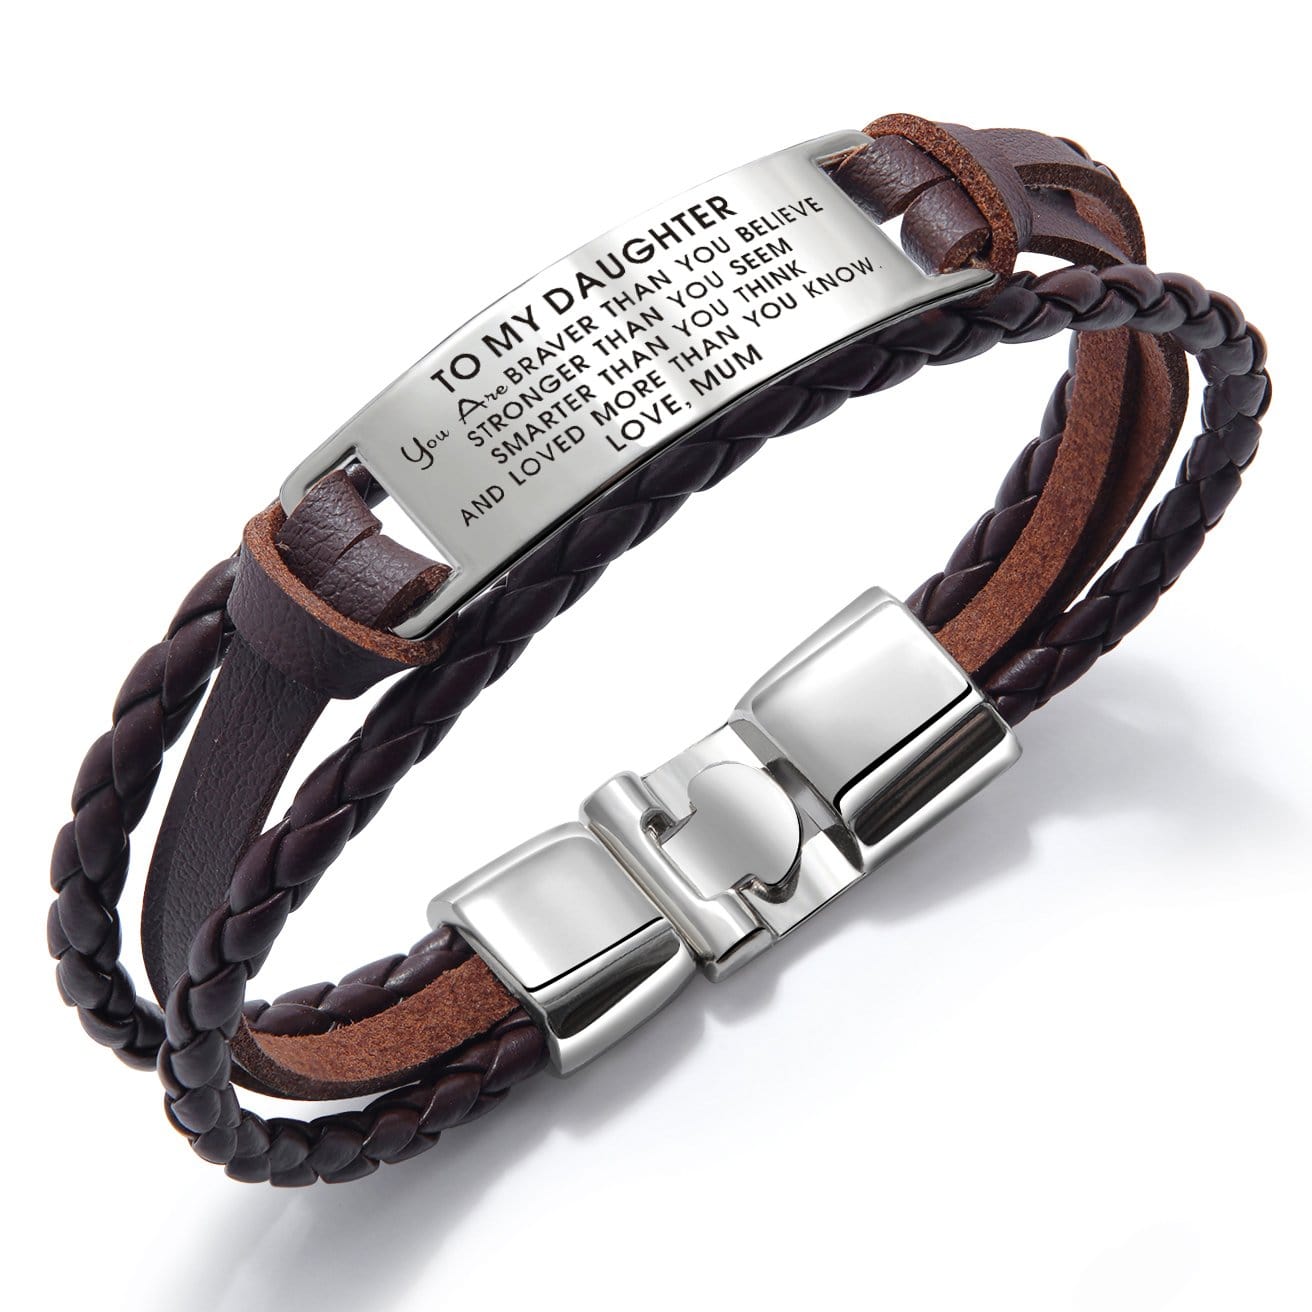 Bracelets Mum To Daughter - You Are Loved More Than You Know Leather Bracelet Brown GiveMe-Gifts